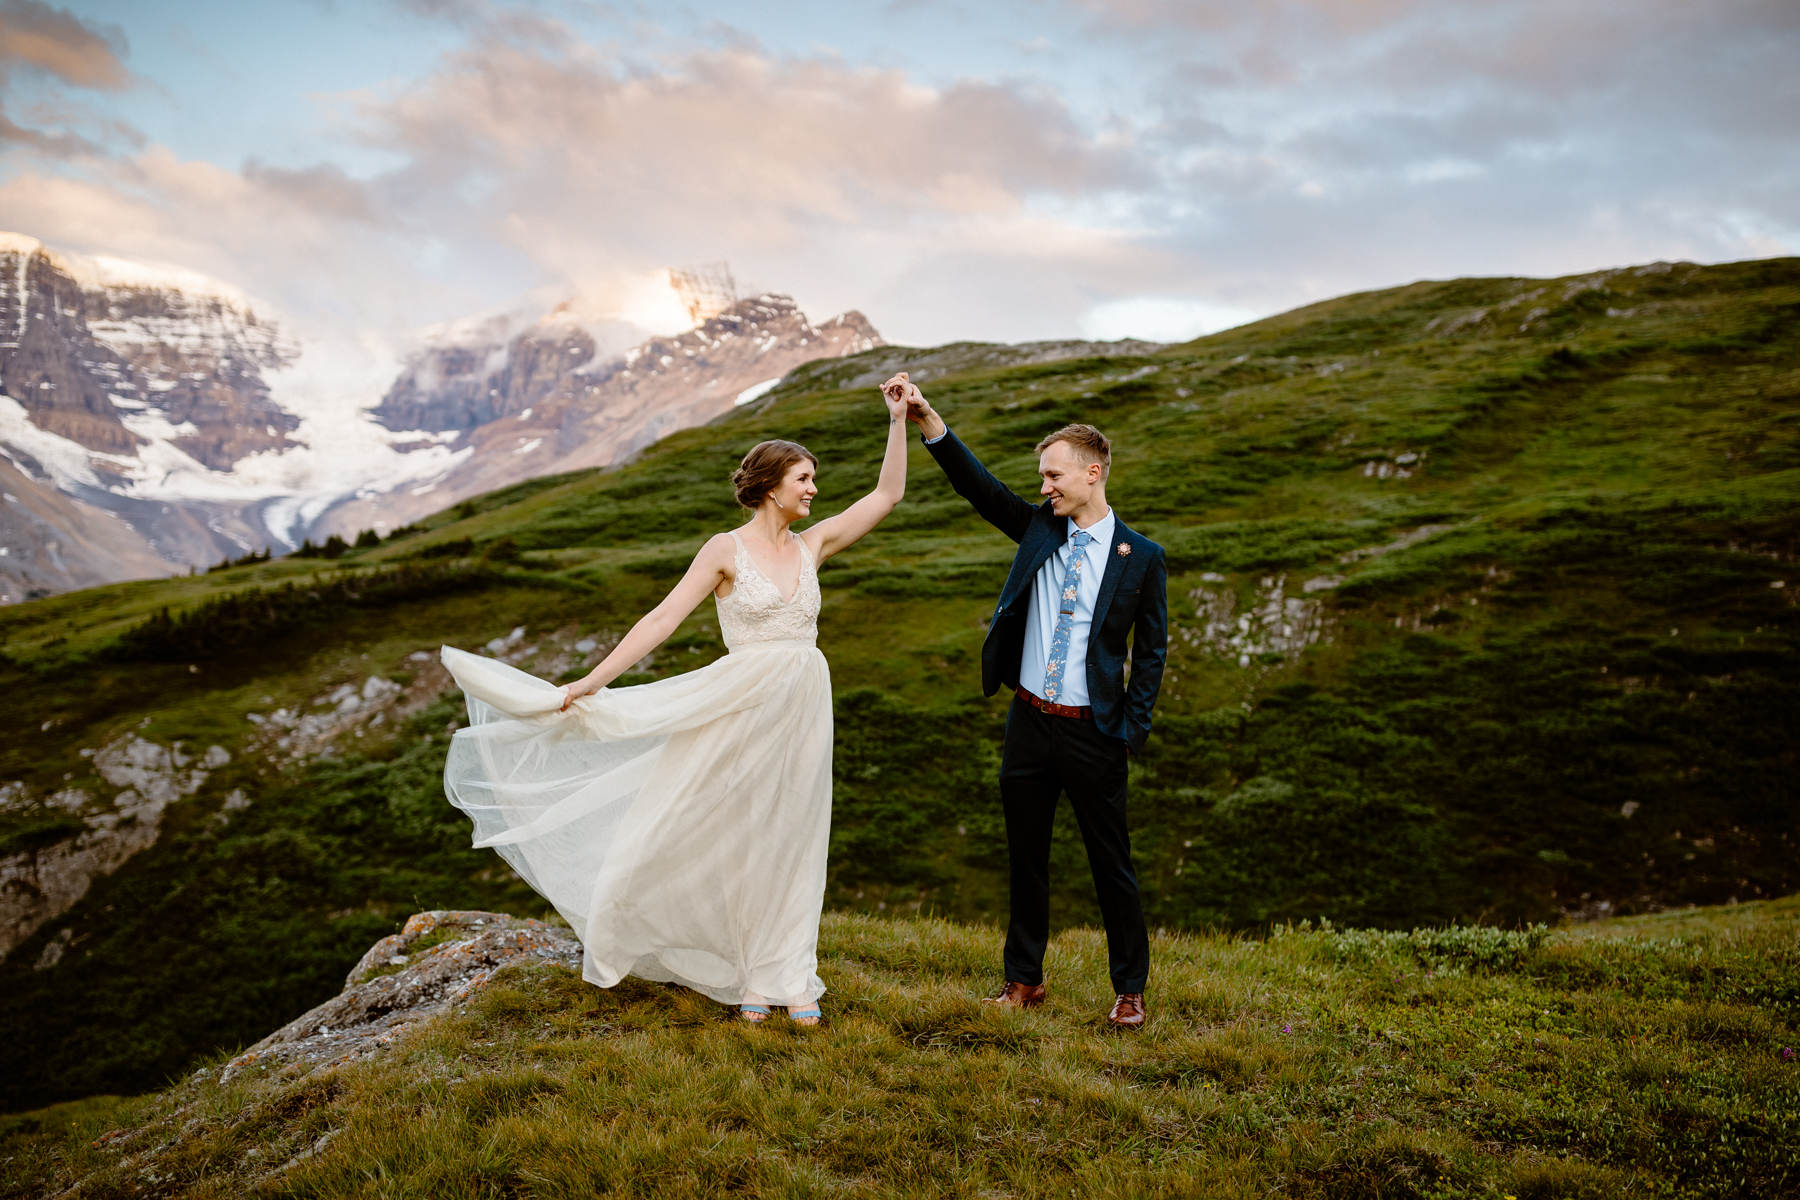 Hiking Elopement Photographers in Banff National Park | Film and Forest